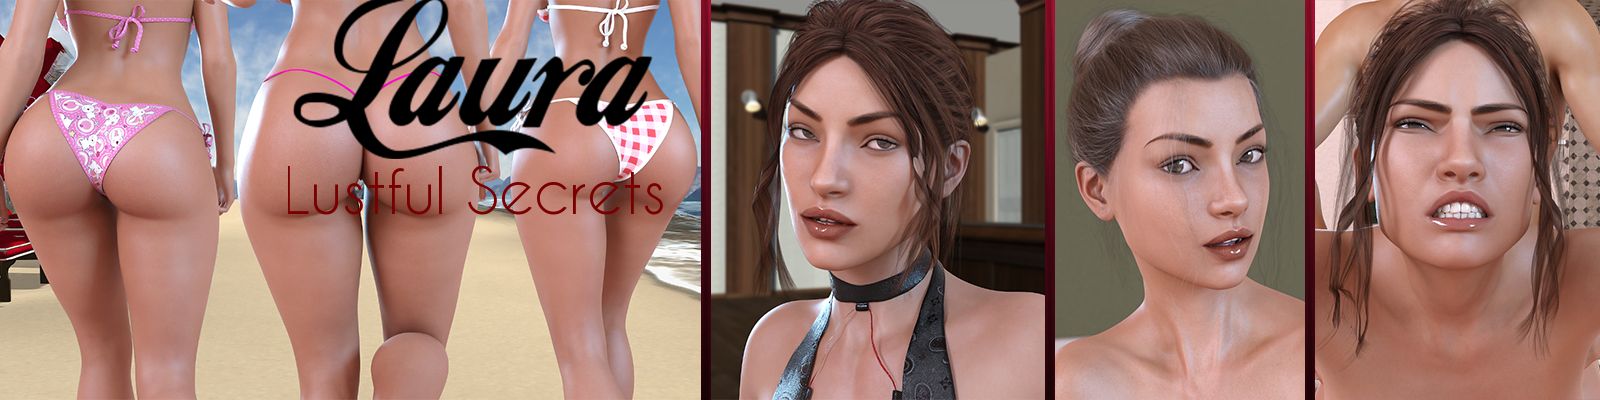 Laura Lustful Secrets Apk Android Adult Game Download (12)